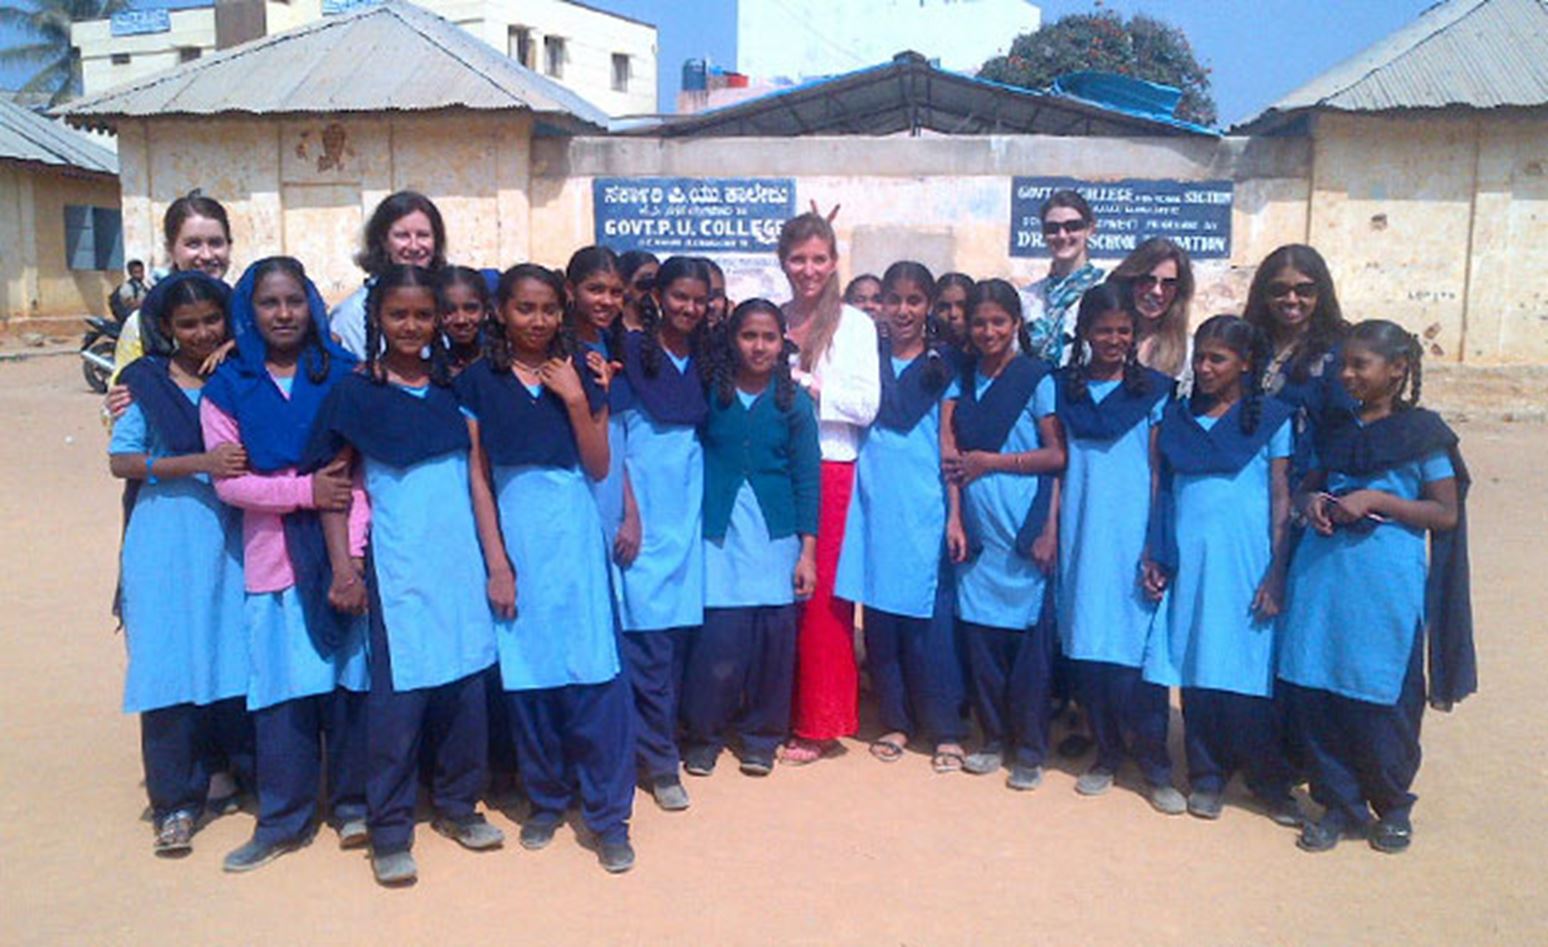 EMBA student Katie Porter shares her real world experience from India